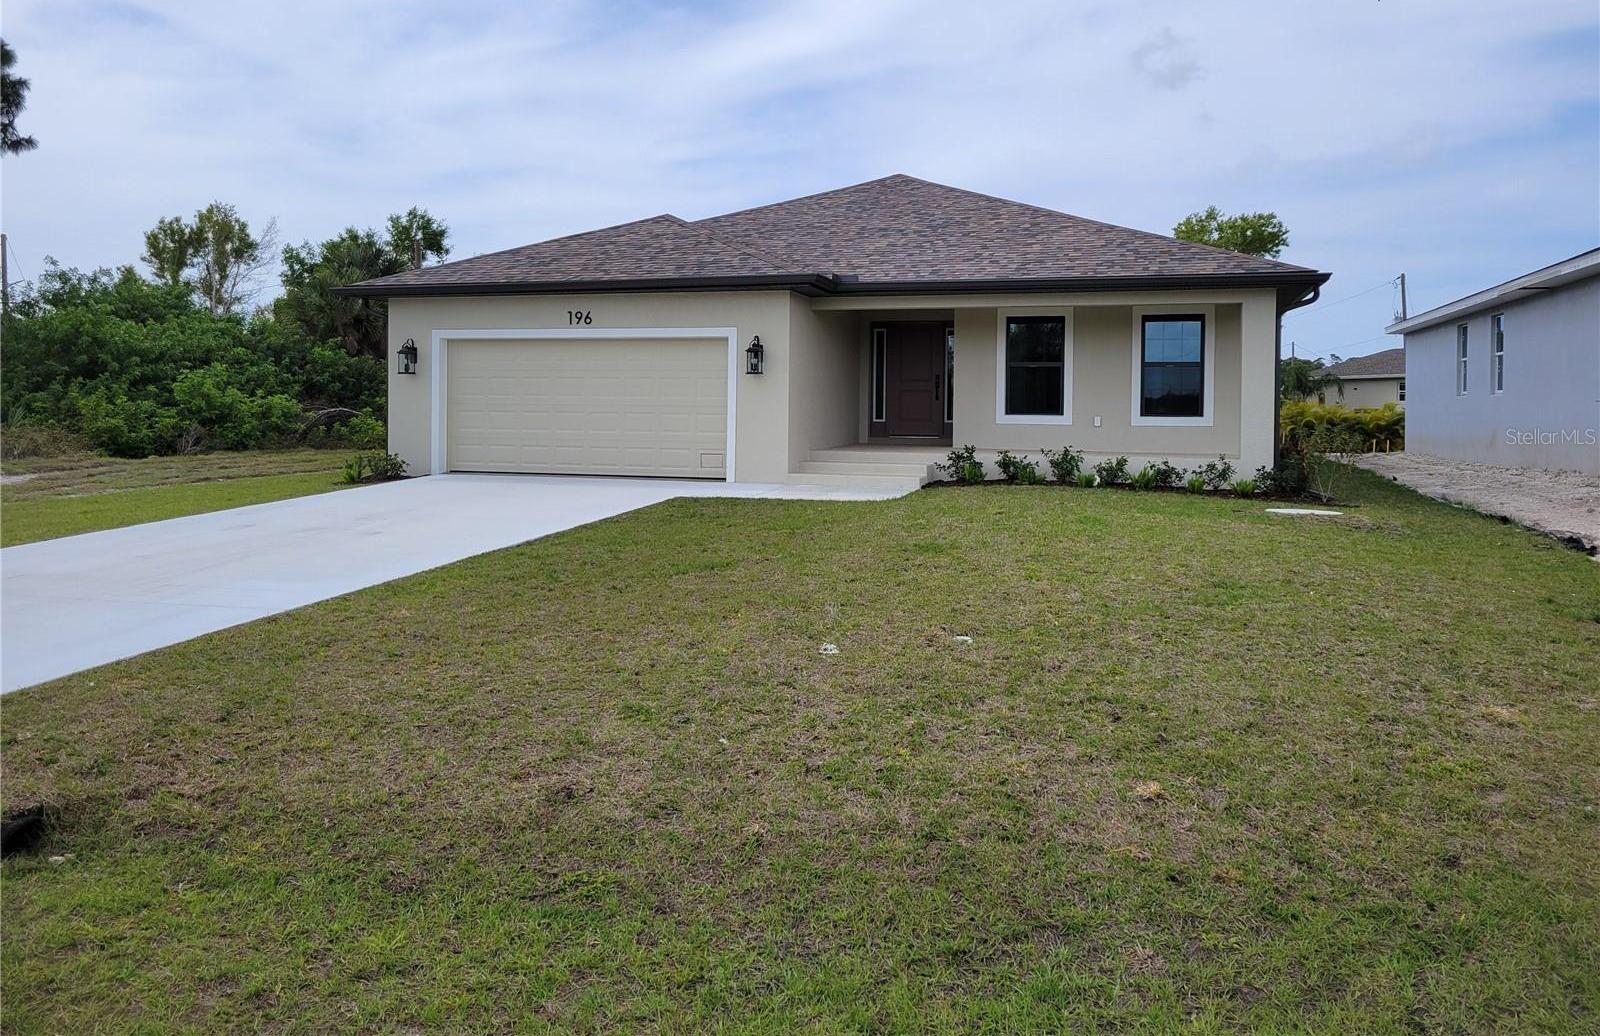 Photo one of 196 Arch Dr Rotonda West FL 33947 | MLS A4601888